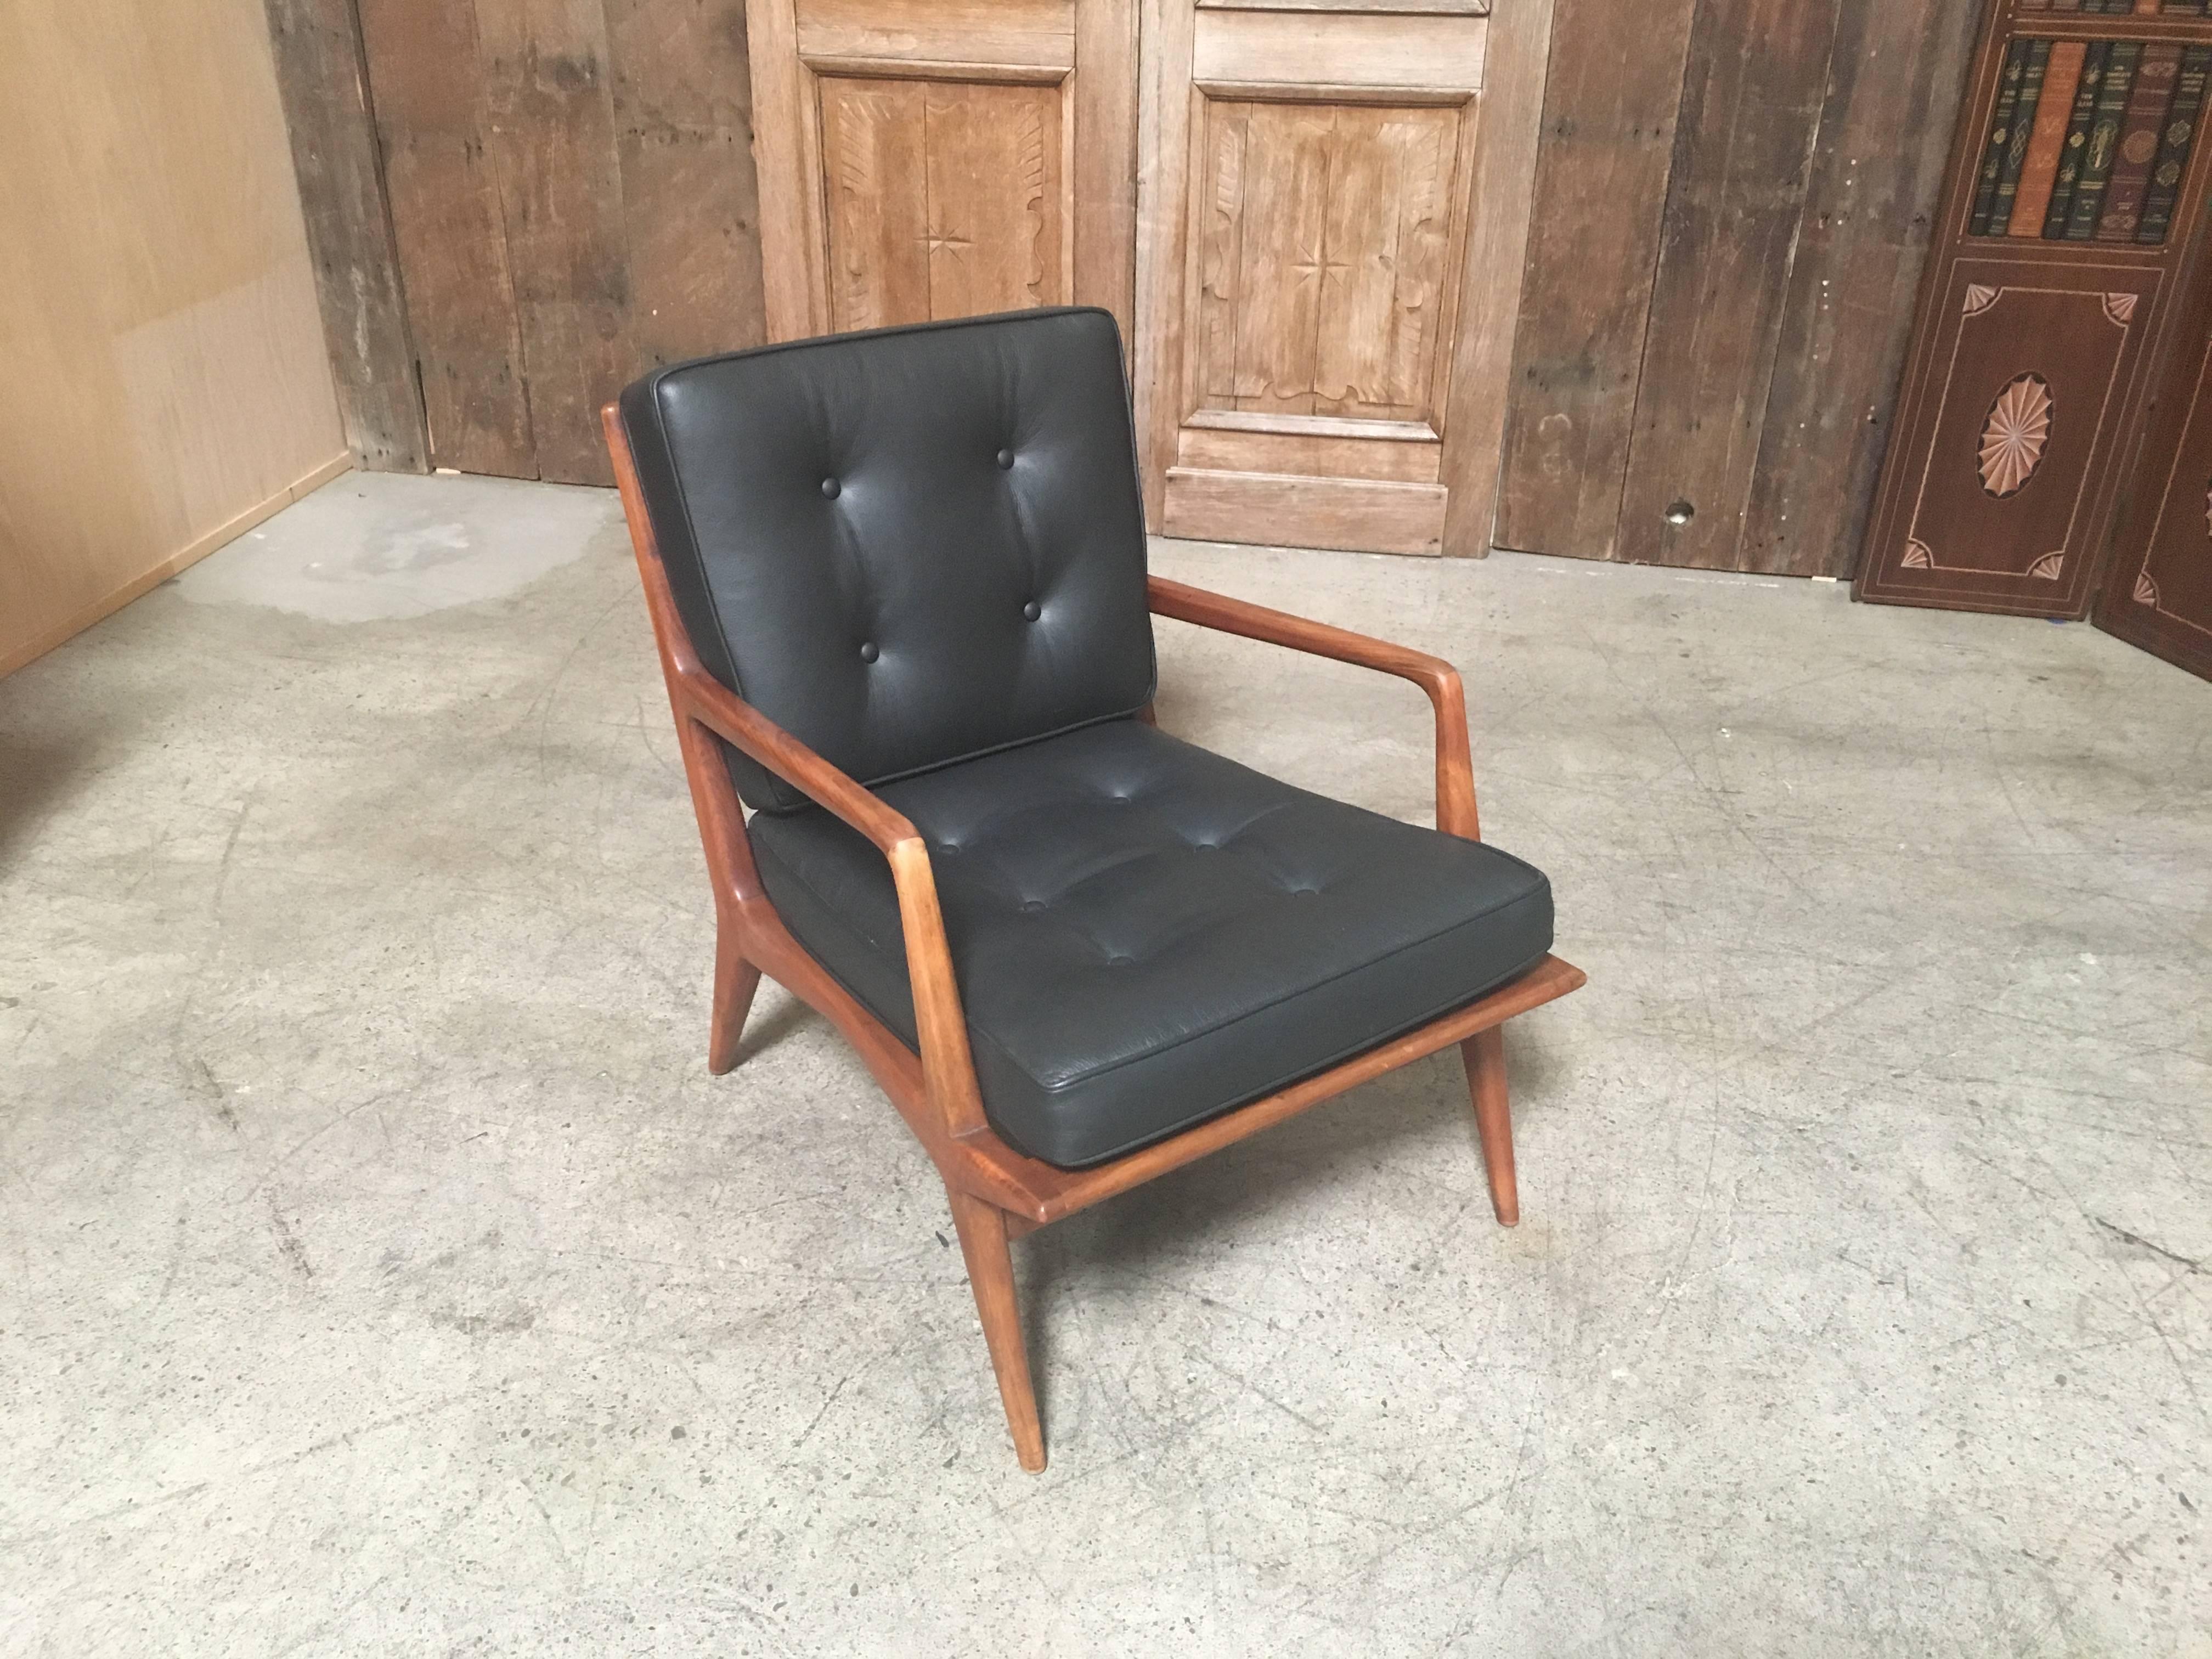 Carlo di Carli lounge chair for M. Singer & Sons, 1950s. With new foam and black leather.